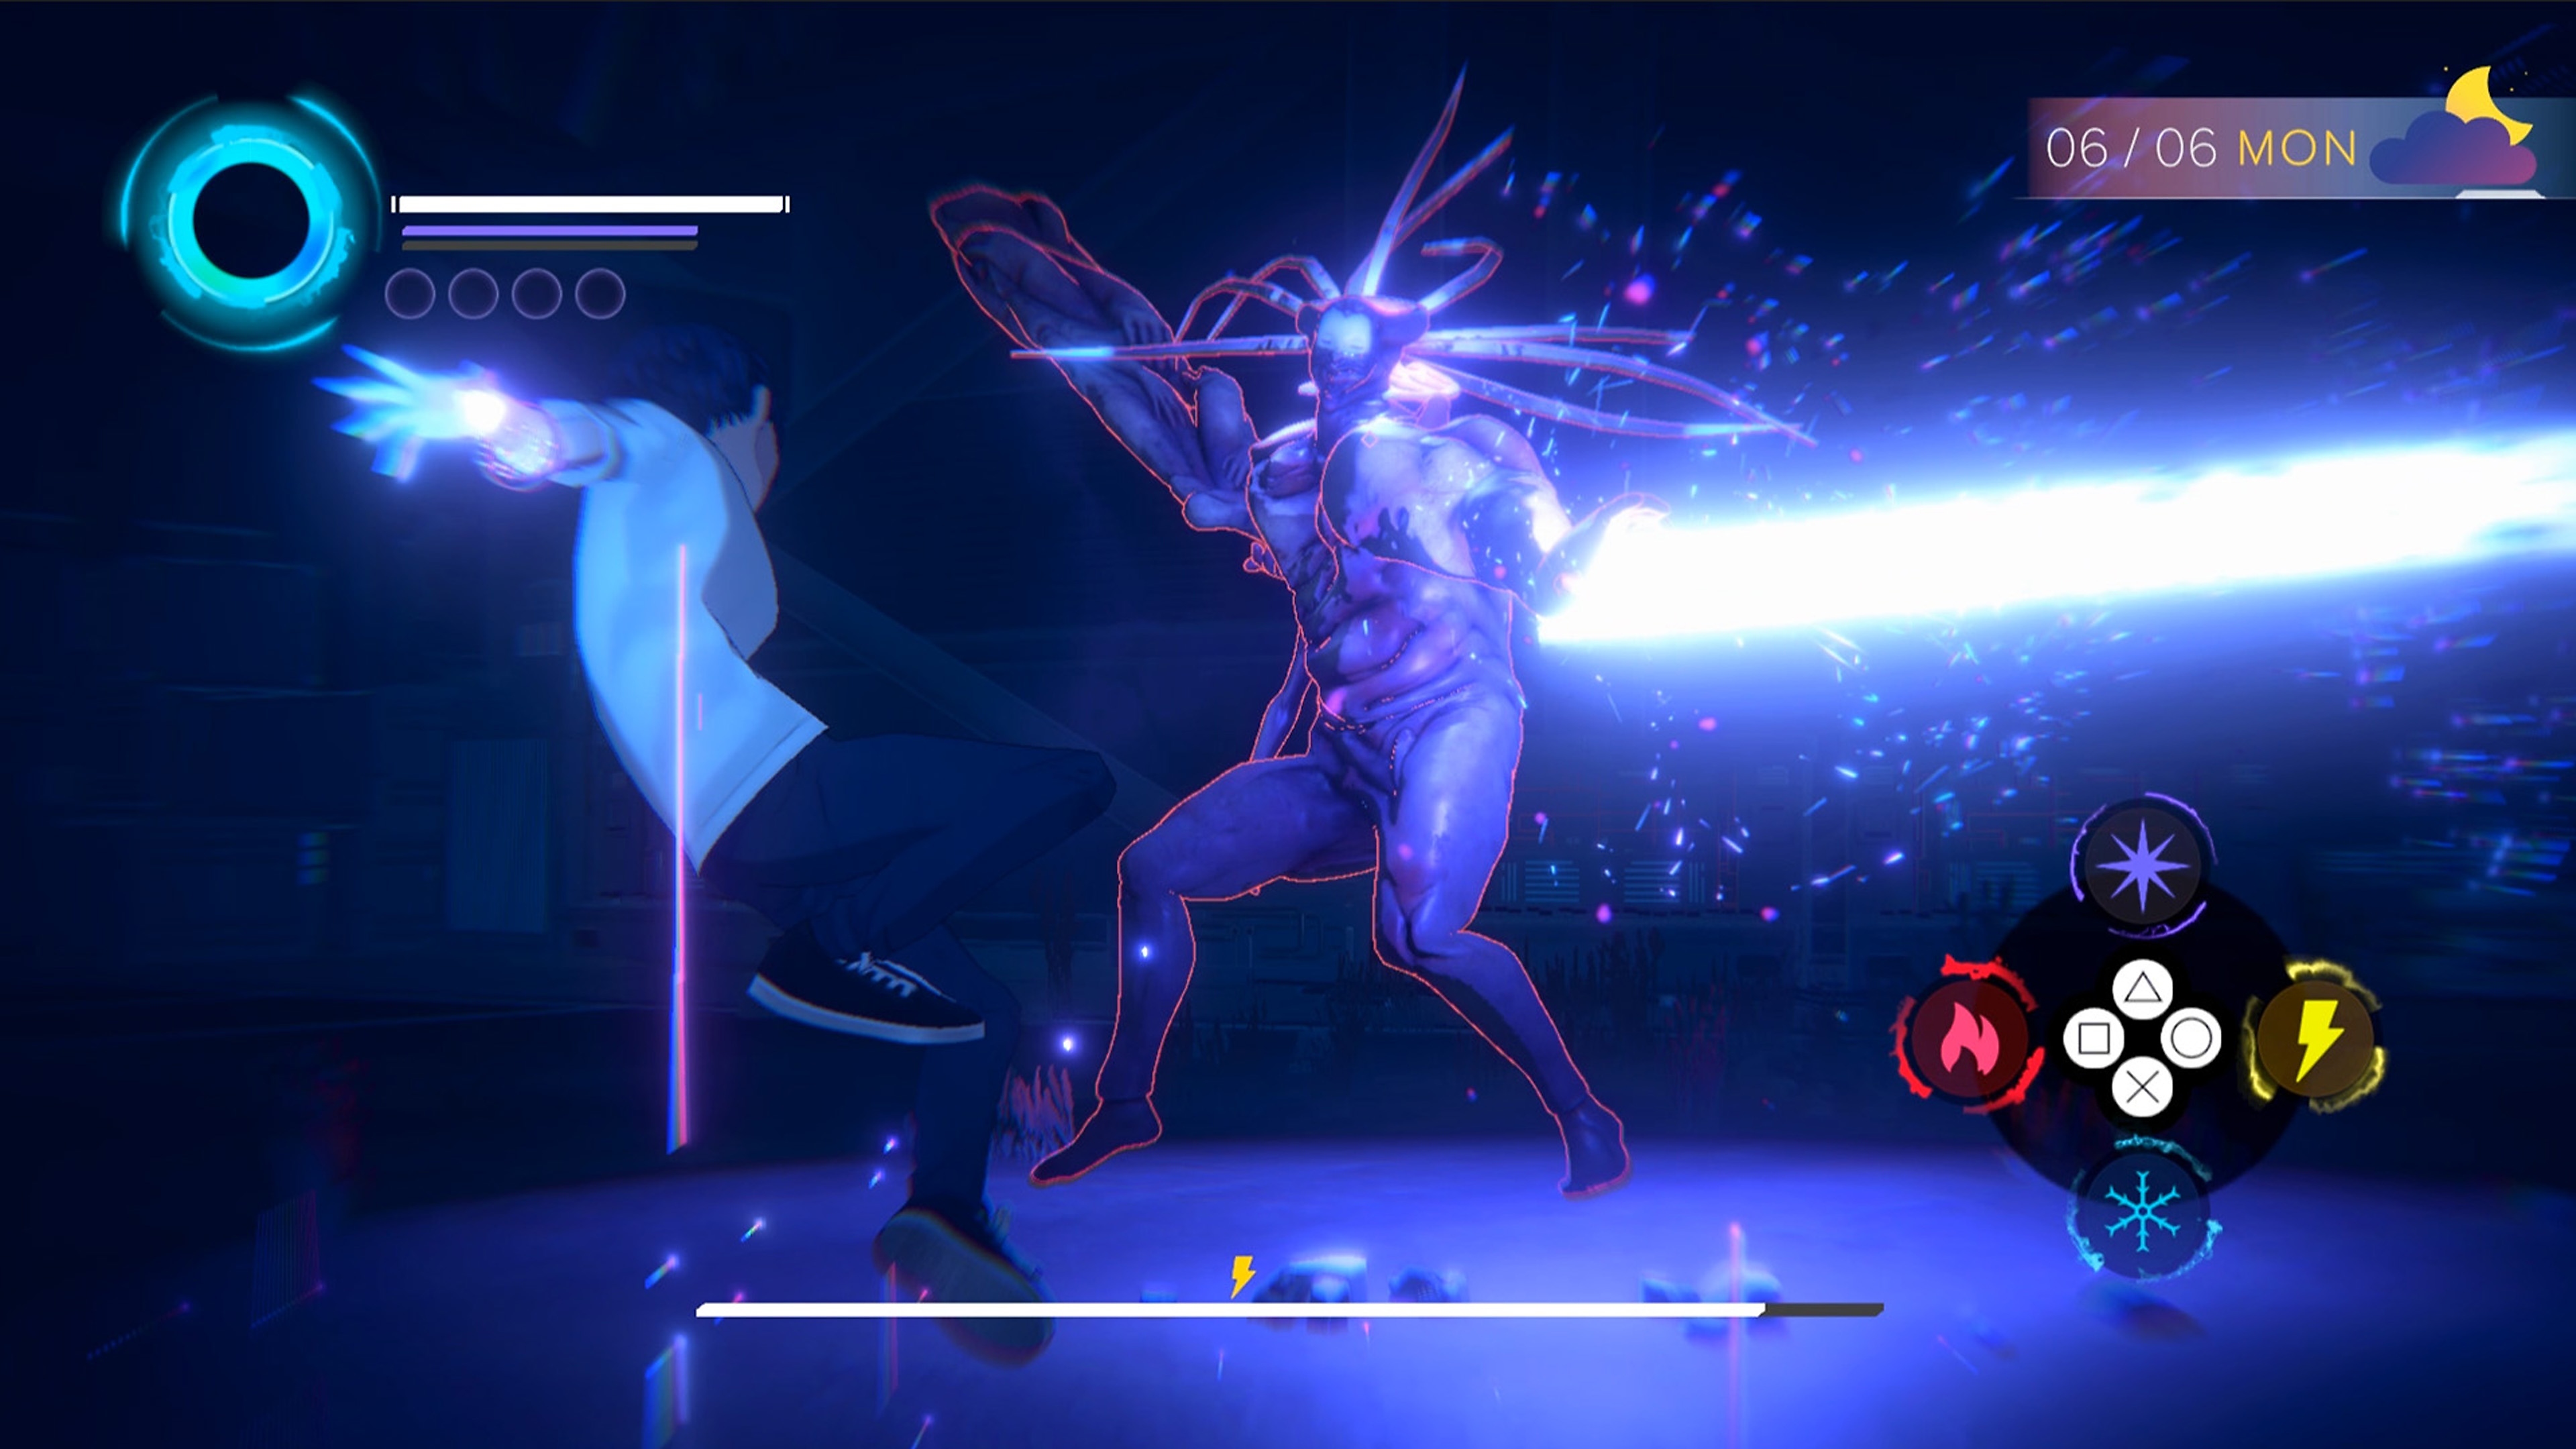 Eternights screenshot featuring a high school age character fighting a large, humanoid demon creature.